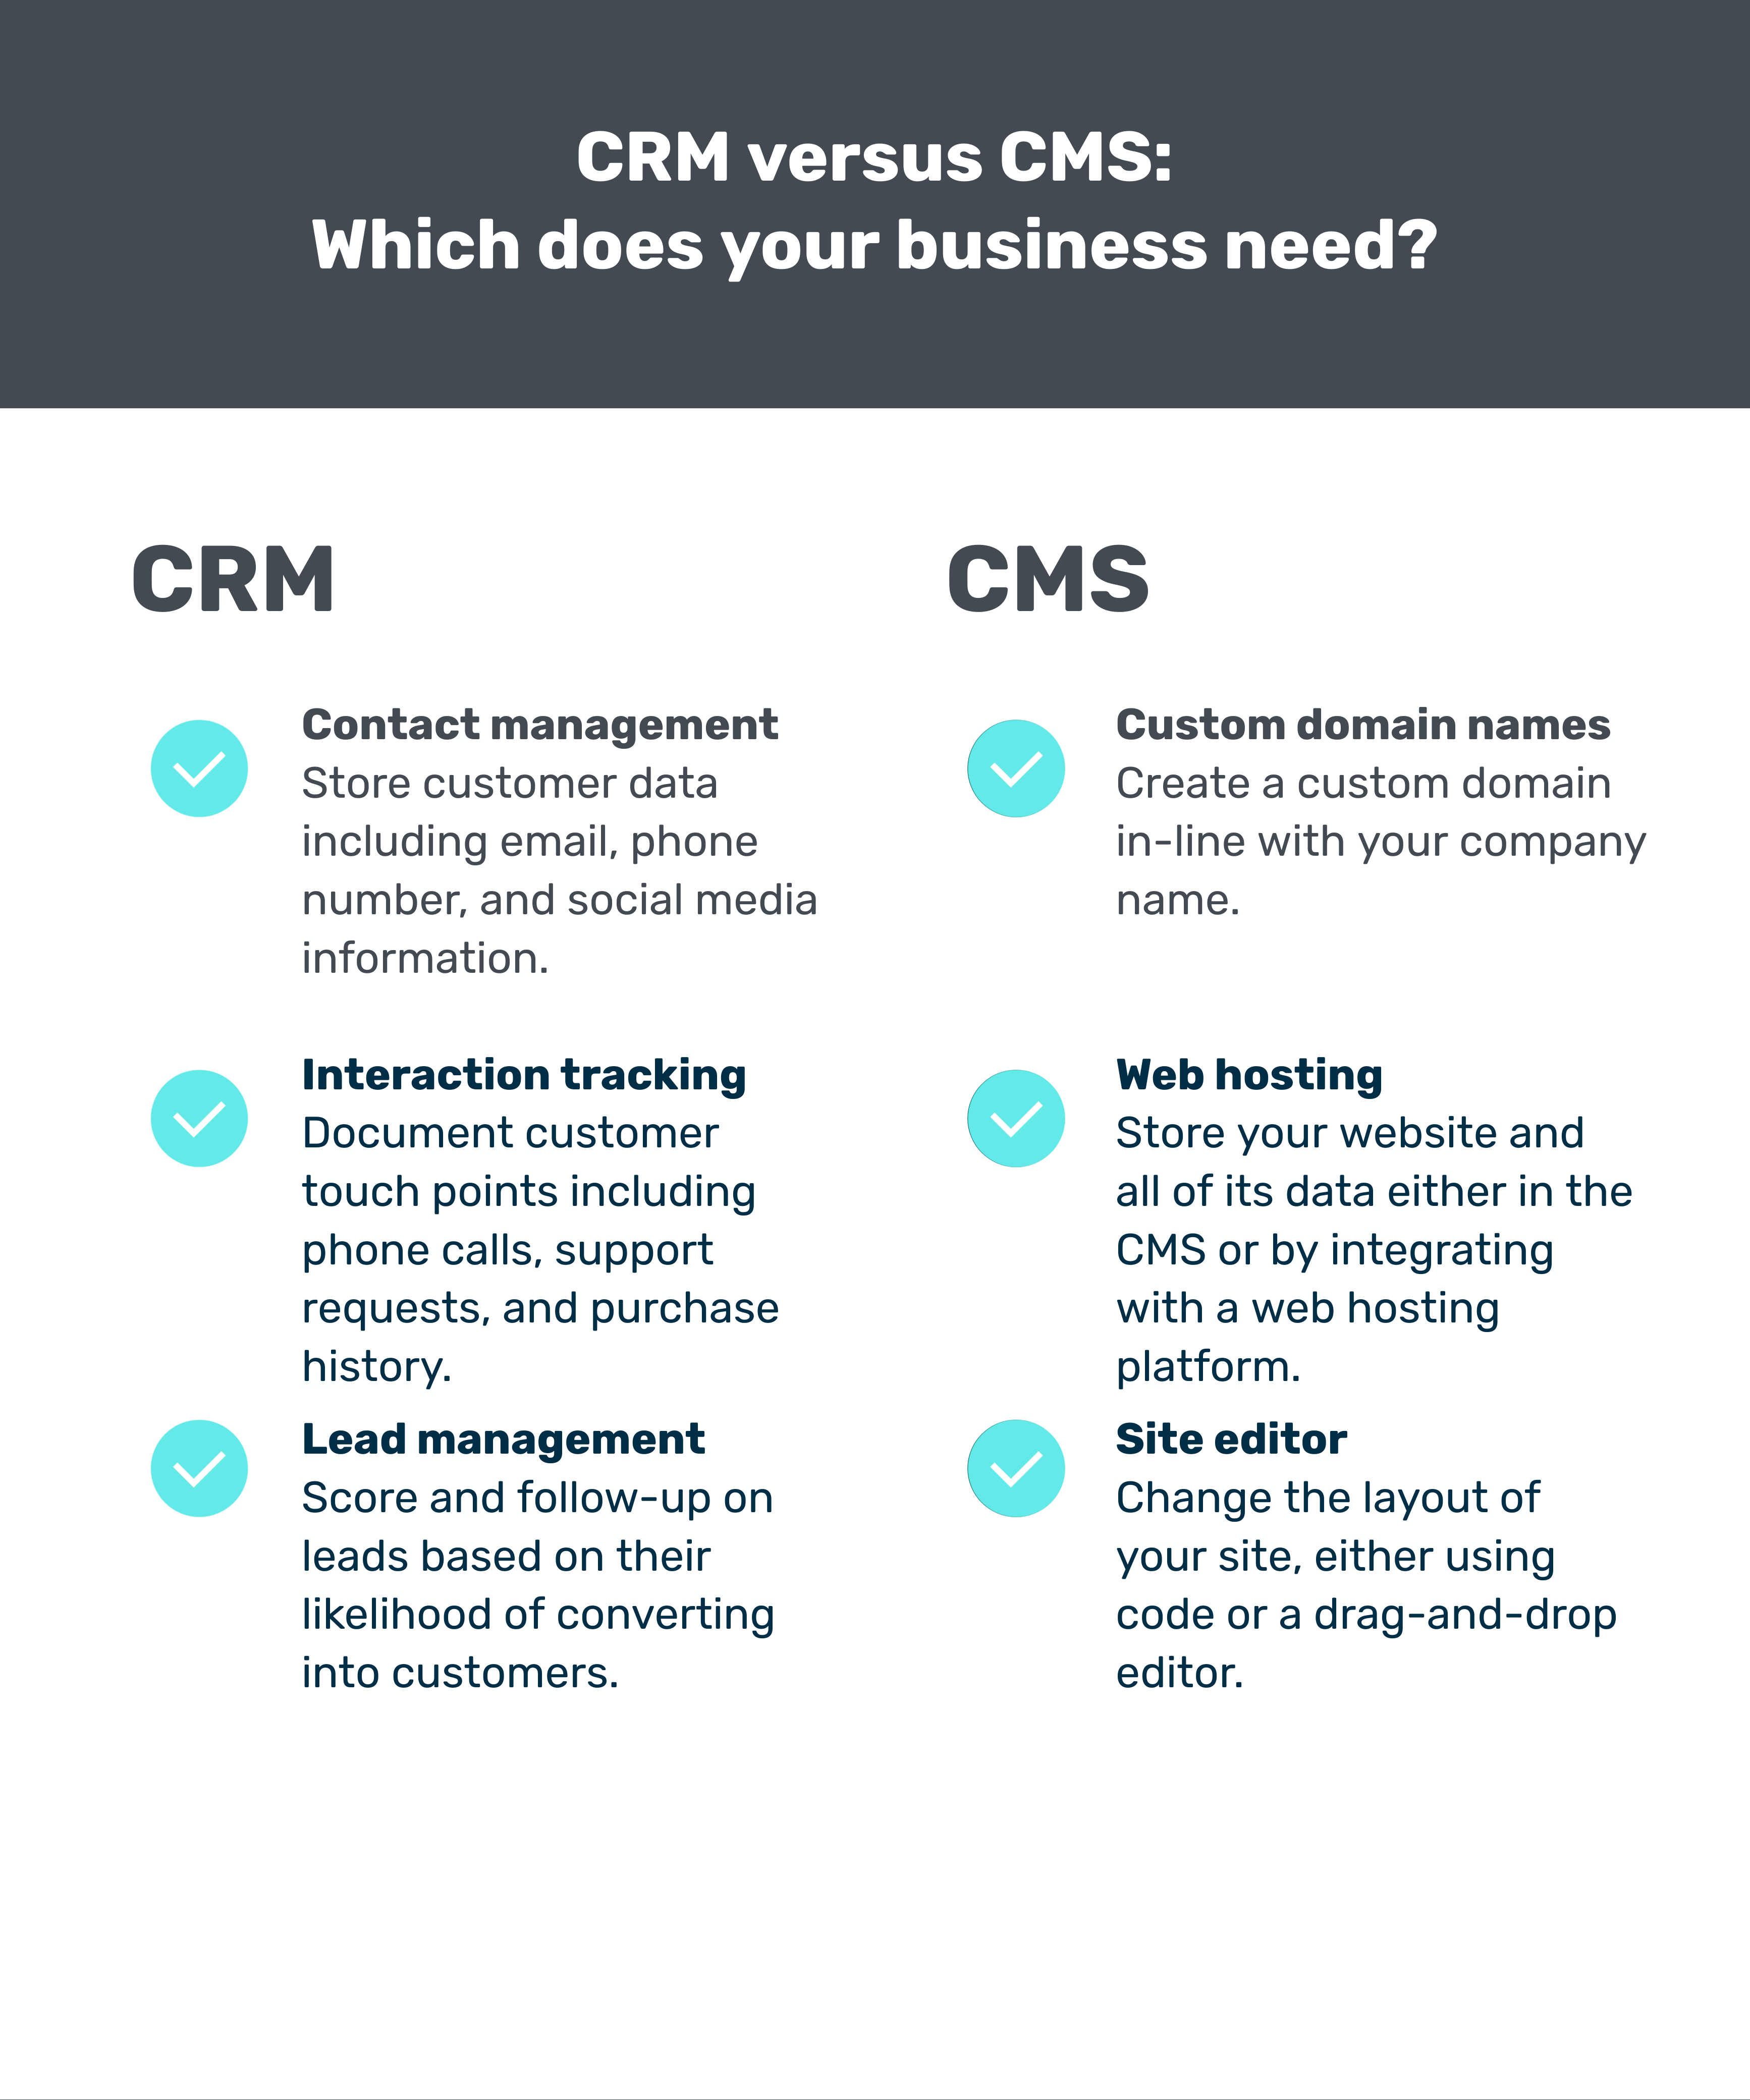 Is CRM part of CMS?